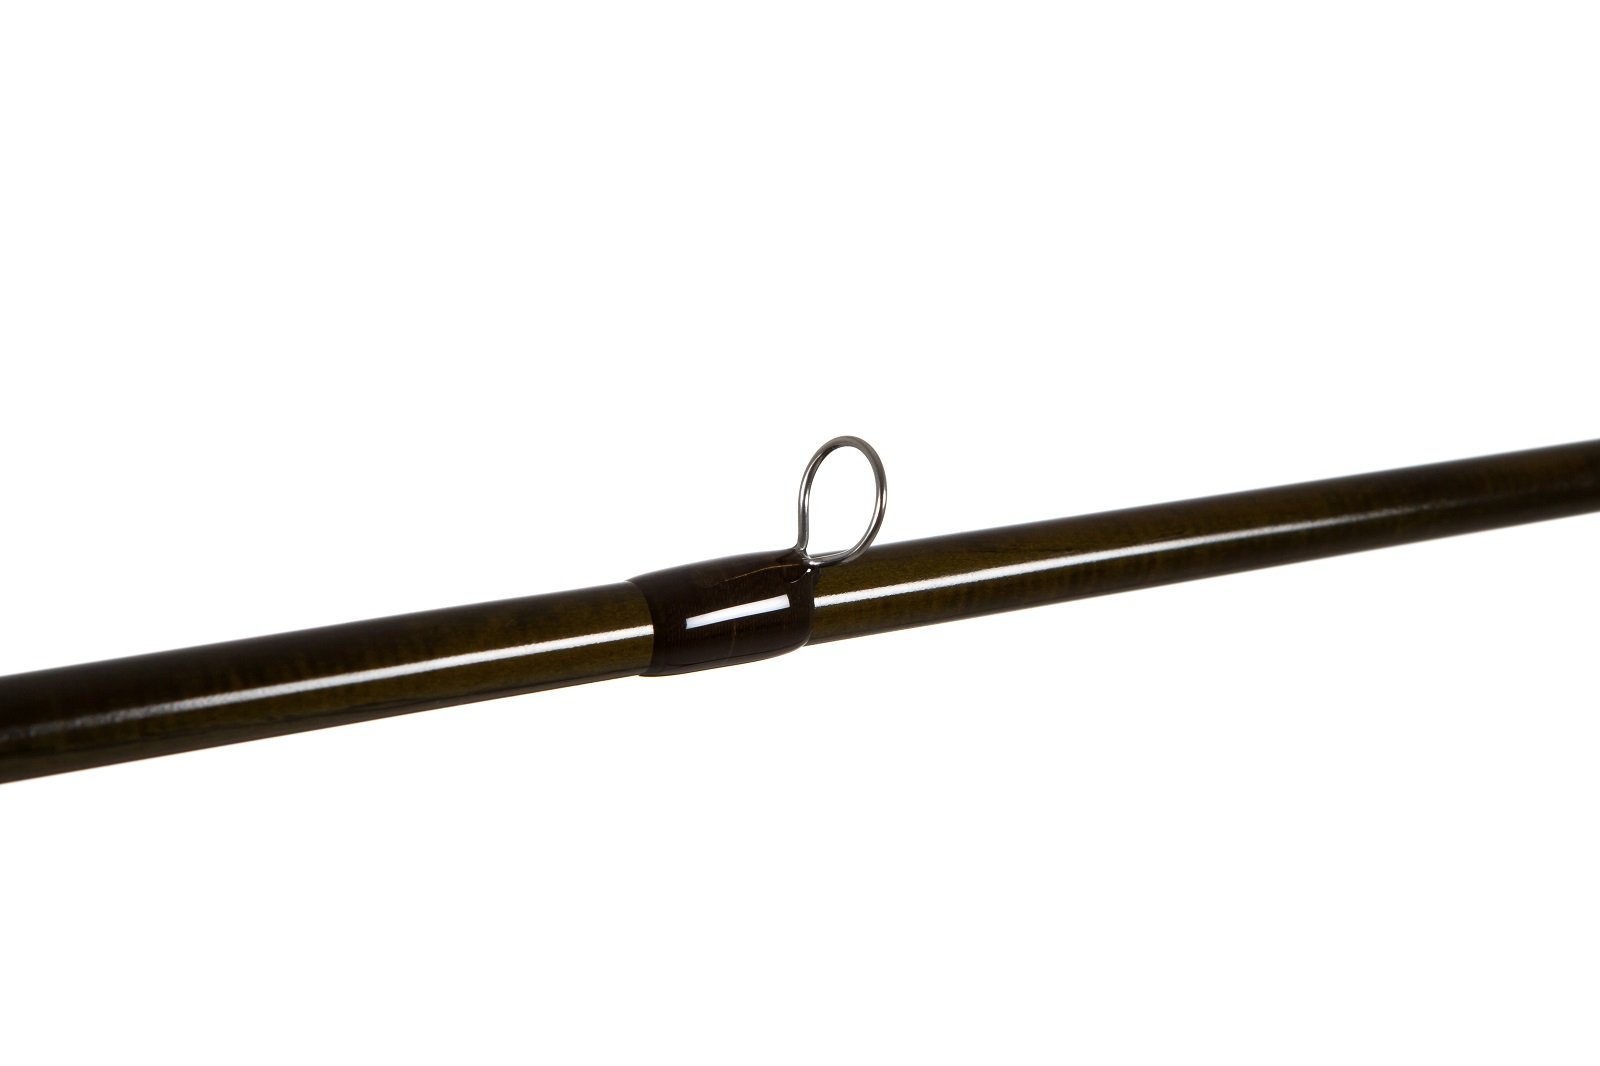 G.Loomis NRX+ LP Fly Rods